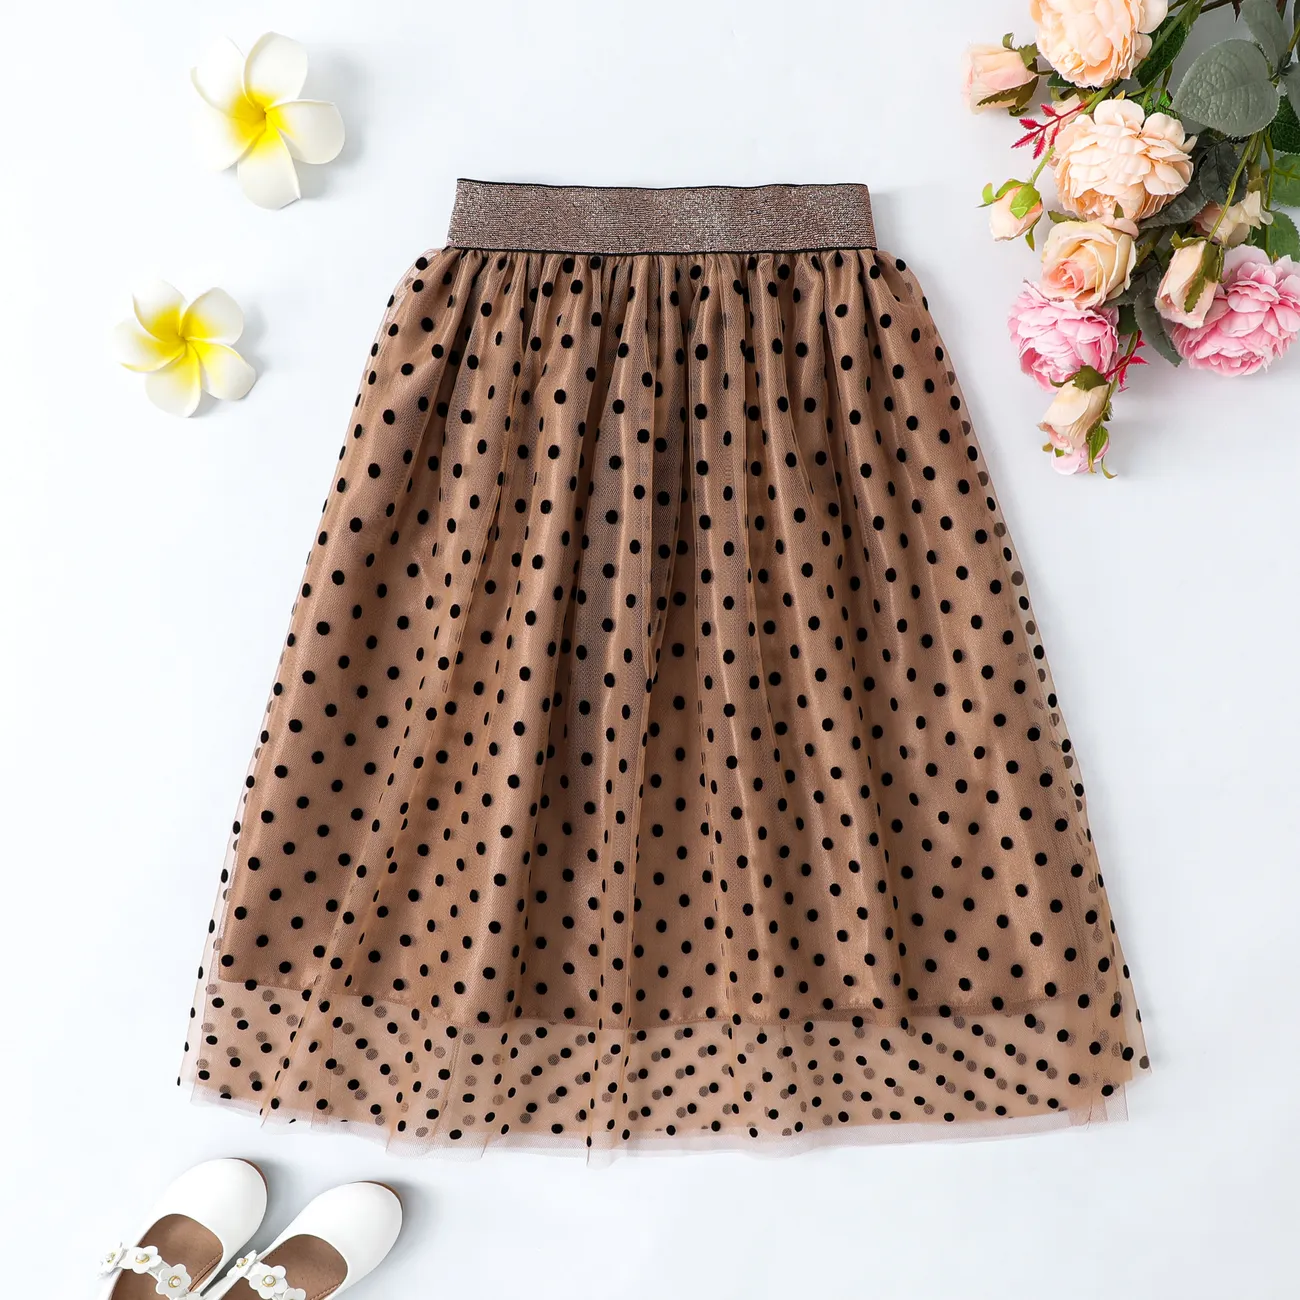 Sweet Polka Dot Multi-layered Skirt for Girls - Oversized Polyester Clothes Set Brown big image 1